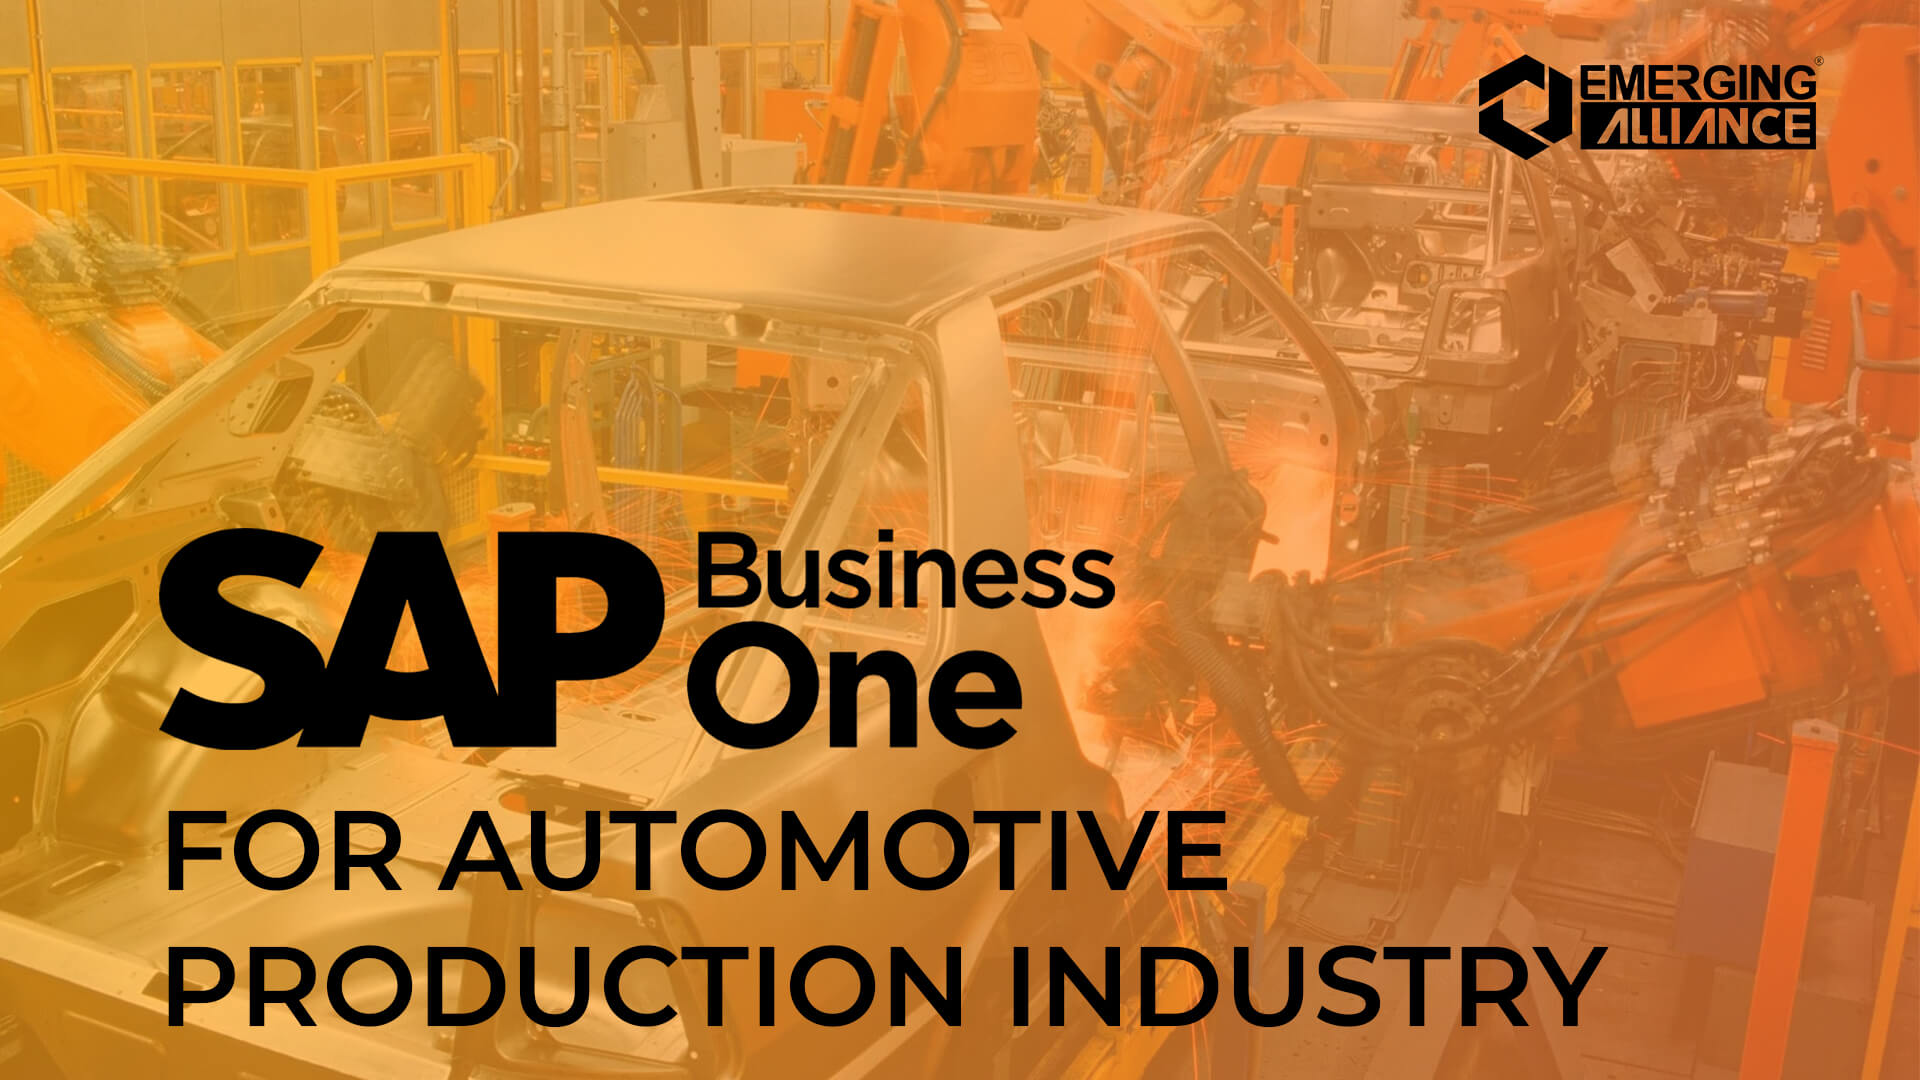 sap business one for Automotive production industry